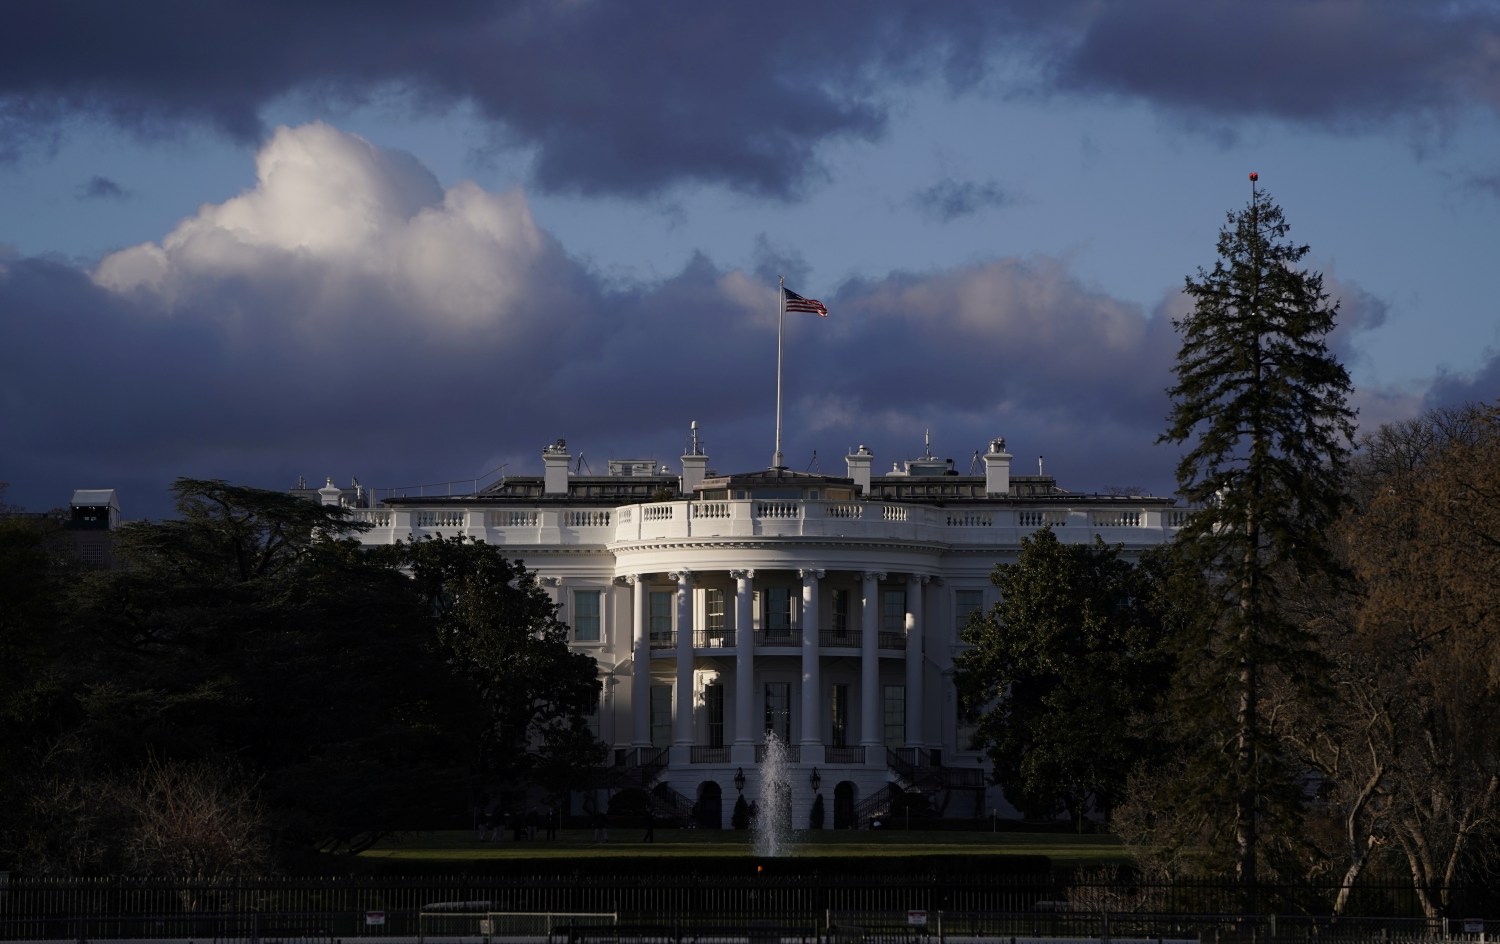 The White House is seen after Special Counsel Robert Mueller handed in his report to Attorney General William Barr on his investigation into Russia's role in the 2016 presidential election and any potential wrongdoing by U.S. President Donald Trump in Washington, U.S., March 22, 2019. REUTERS/Joshua Roberts - RC1F6046A900